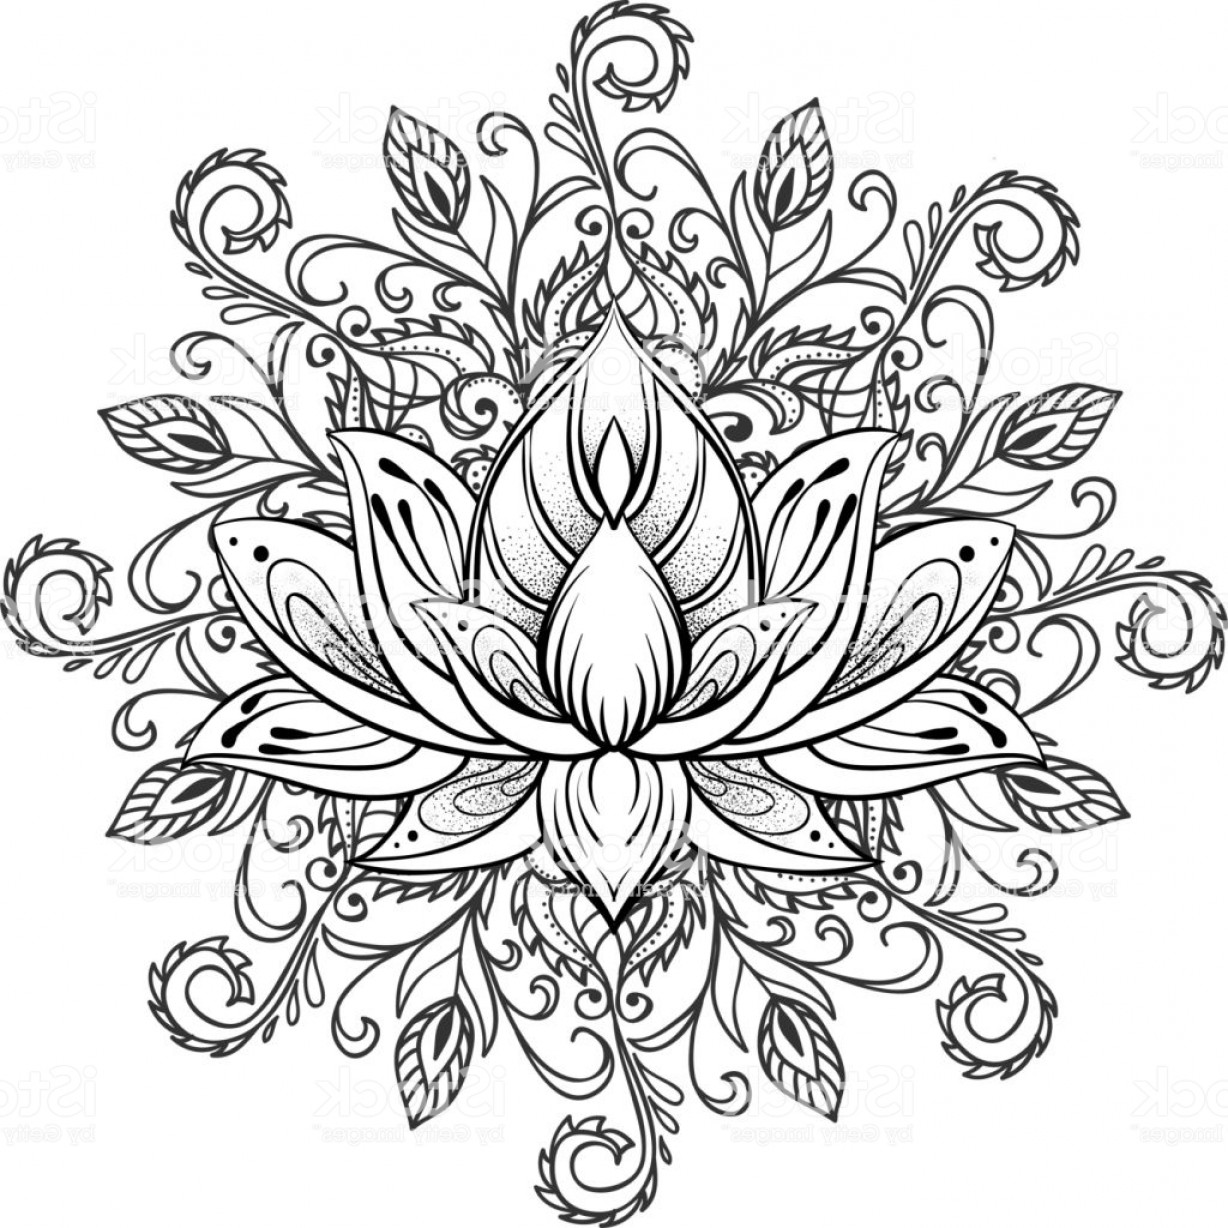 Download Mandala Flower Vector at Vectorified.com | Collection of ...